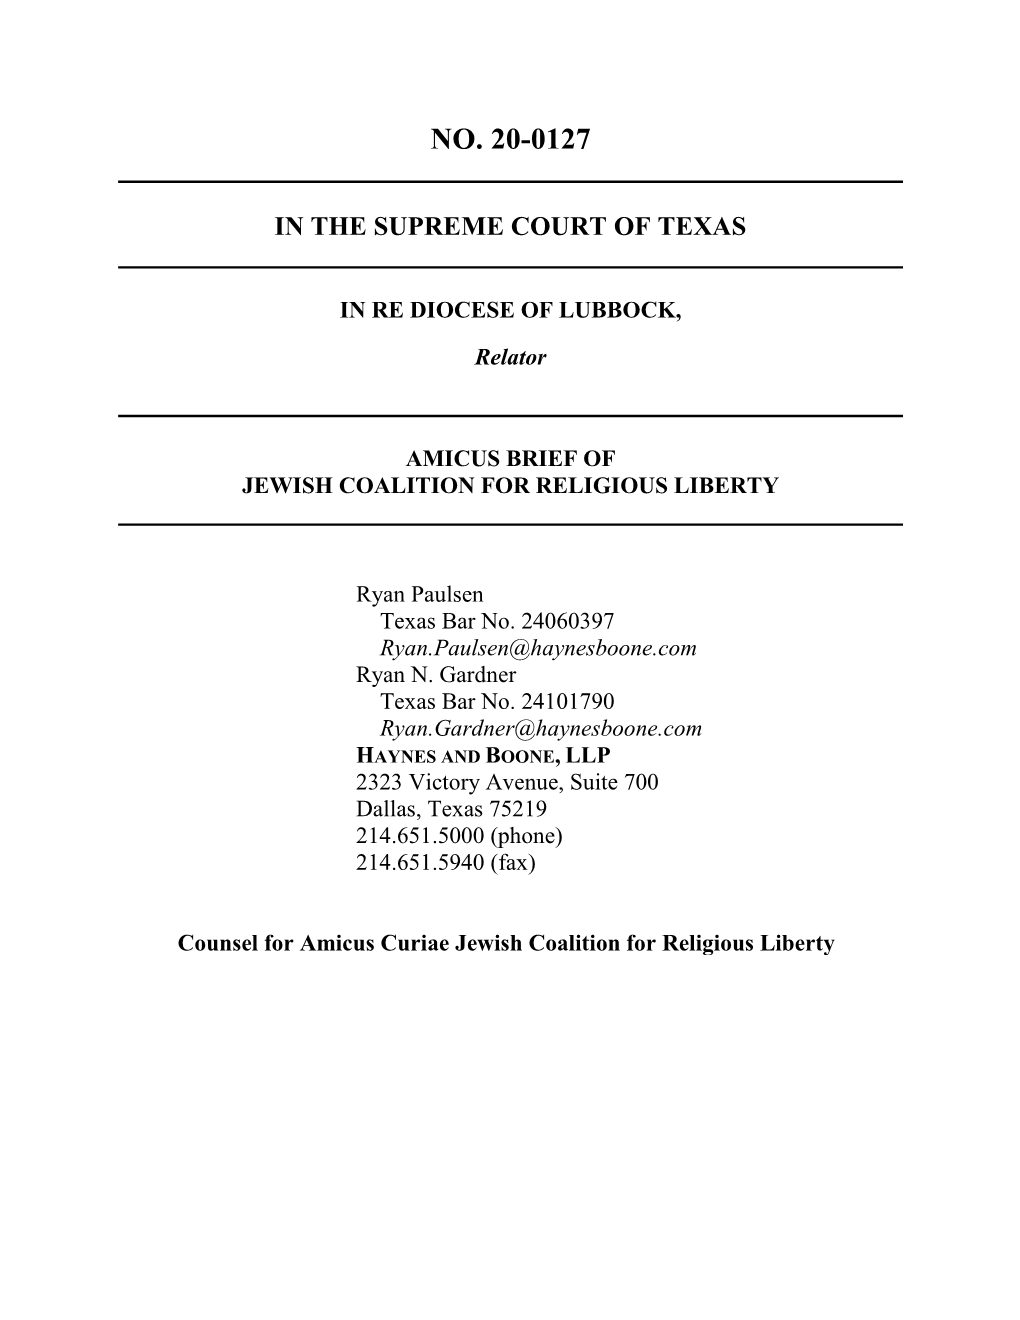 Jewish Coalition for Religious Liberty Amicus Brief In